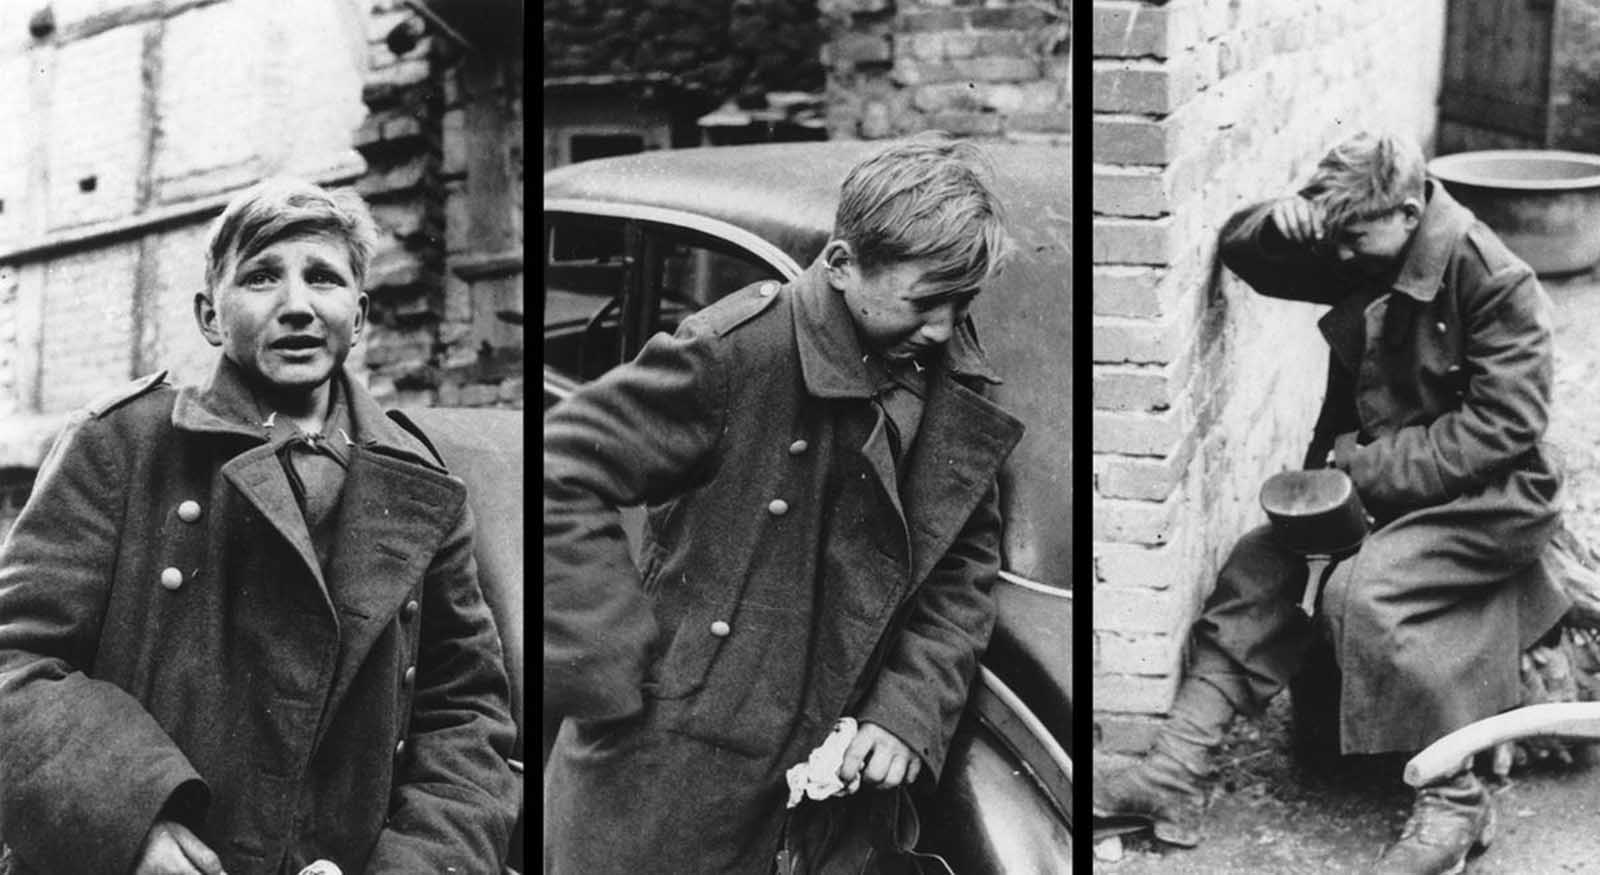 This combination of three photographs shows the reaction of a 16-year old German soldier after he was captured by U.S. forces, at an unknown location in Germany, in 1945.